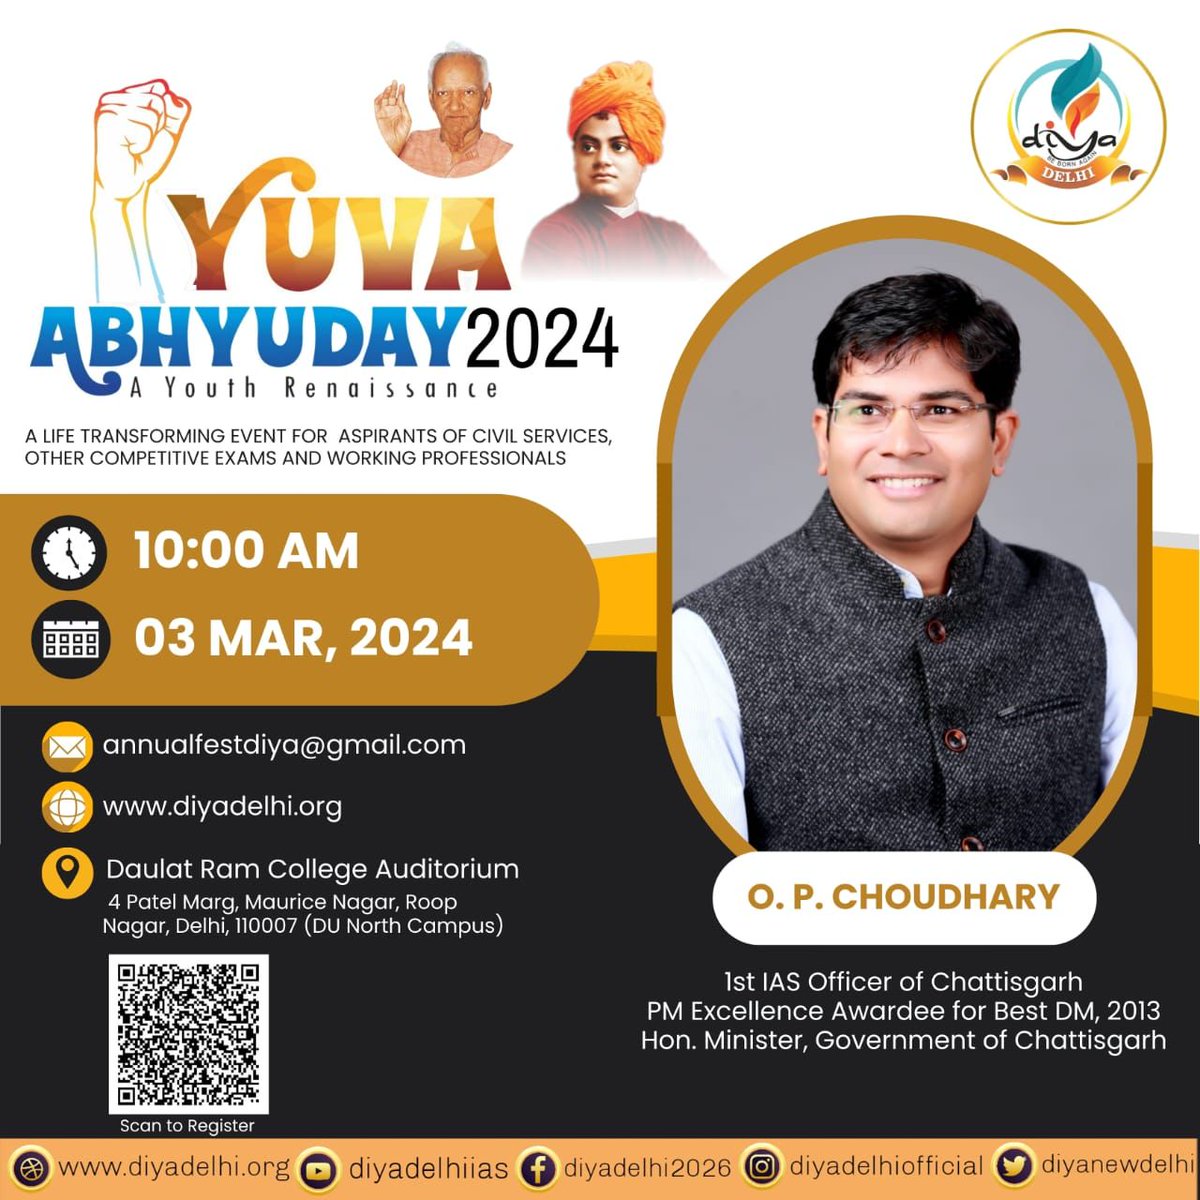 🌈 *If you want to Shine like a Sun, first burn like a Sun.* -*Dr. APJ Abdul Kalam* To discover yourself from inside out, *DIYA Delhi* , invites you to *YUVA ABHYUDAY 2024* - a life transforming event for the aspirants of Civil Services and other competitive exams to learn